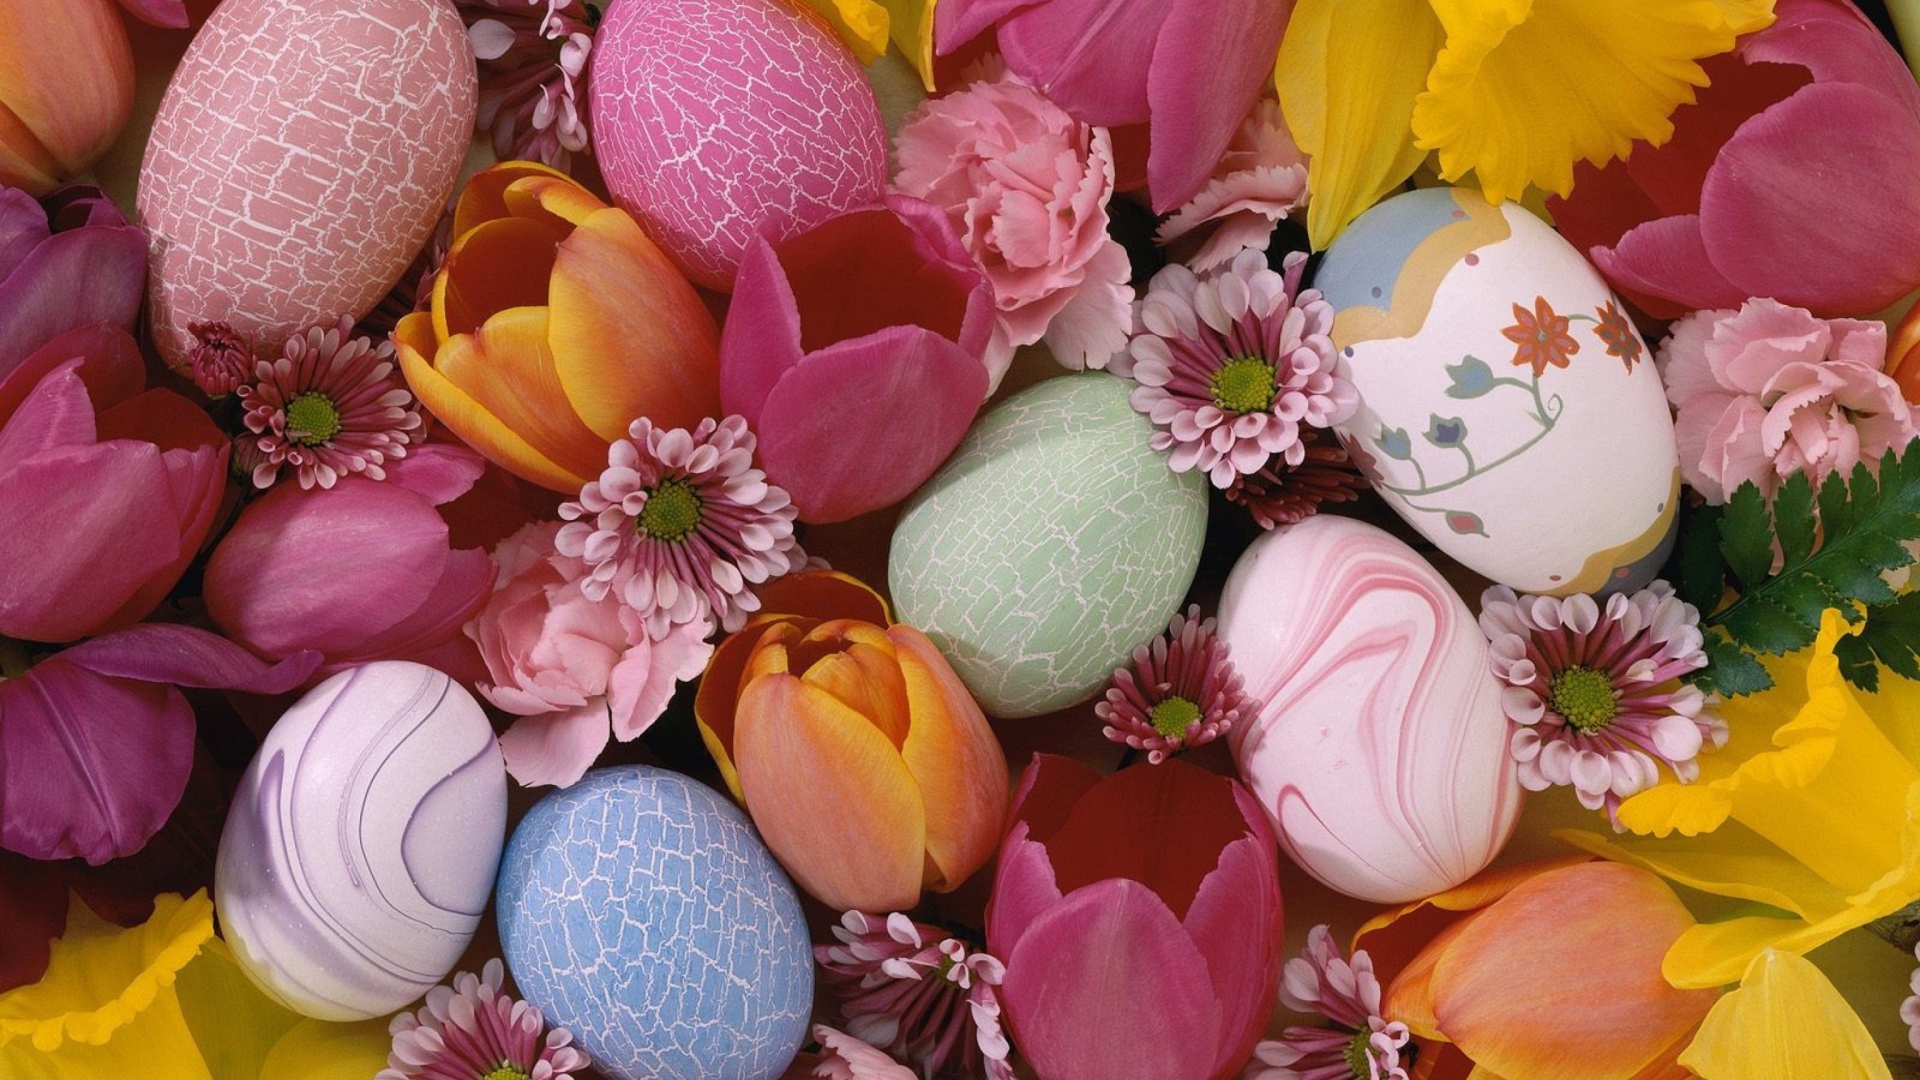 Easter Eggs And Flowers wallpaper 1920x1080